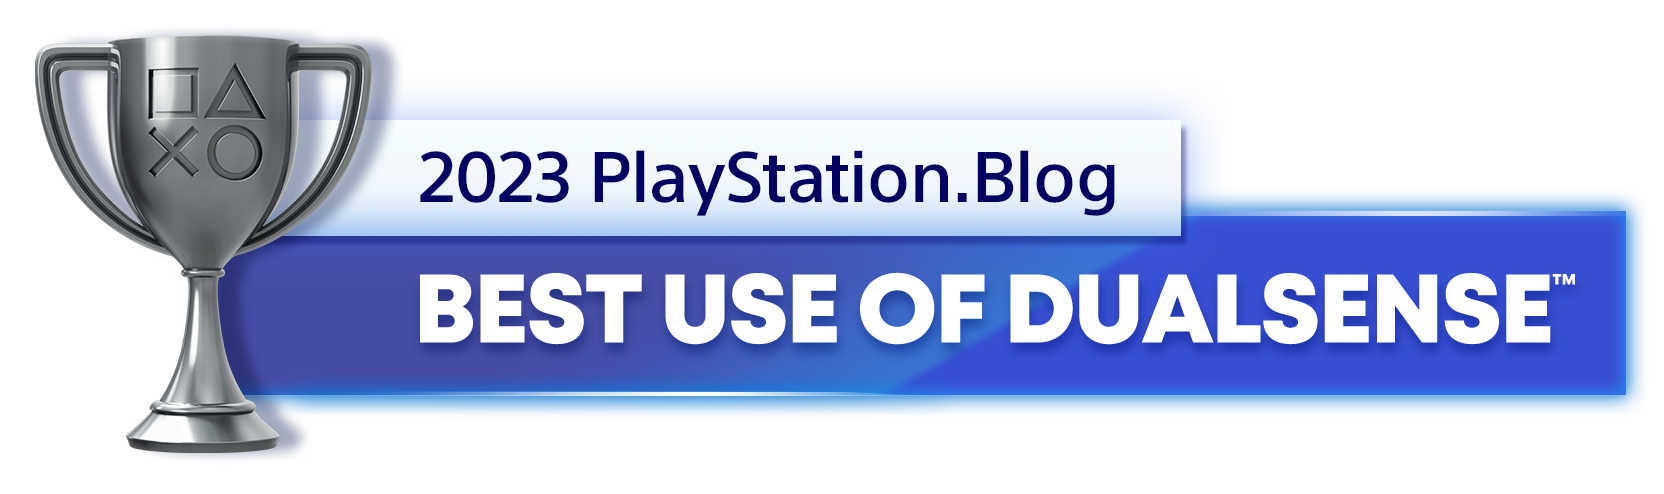  "Silver Trophy for the 2023 PlayStation Blog Best Use of DualSense Controller Winner"